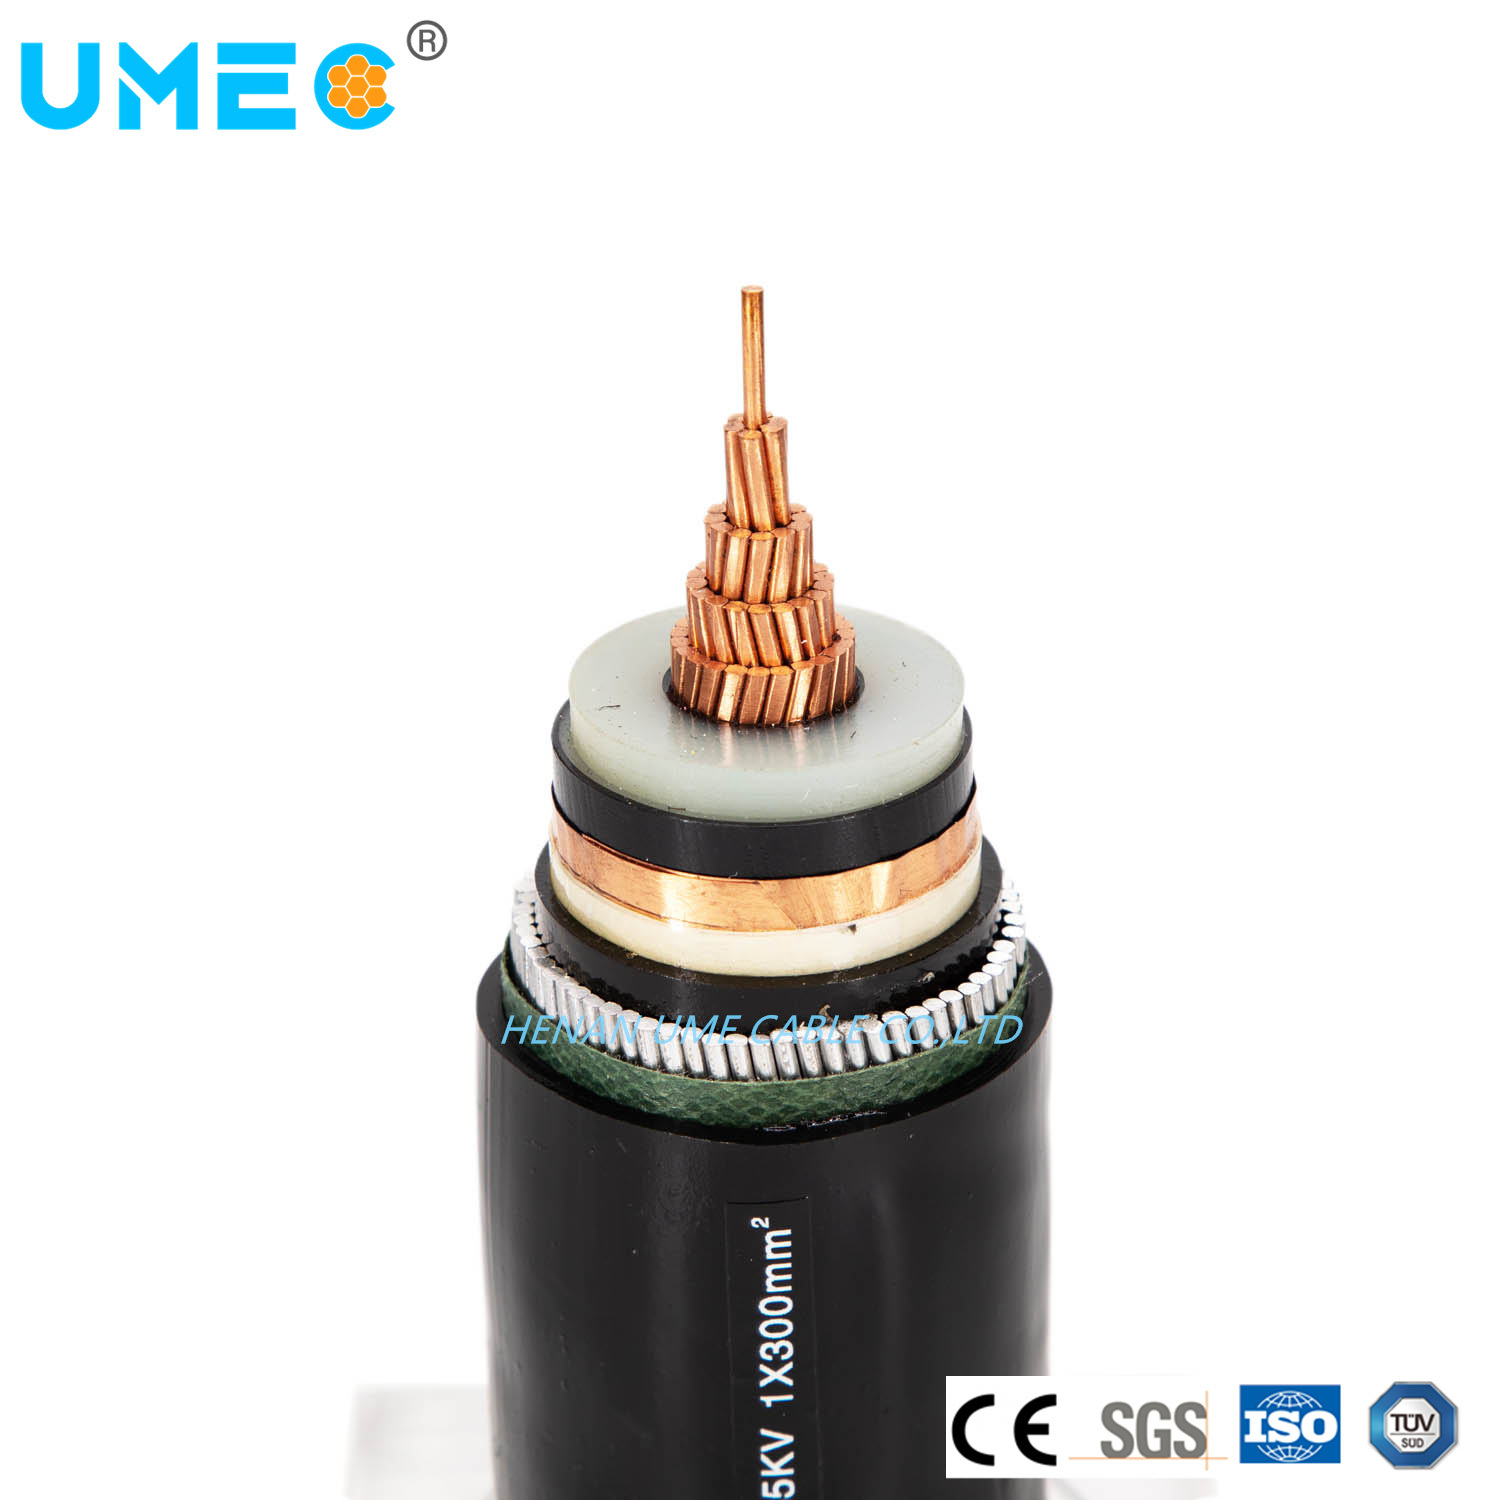 35 Kv or Lower Power Cable with XLPE Insulation